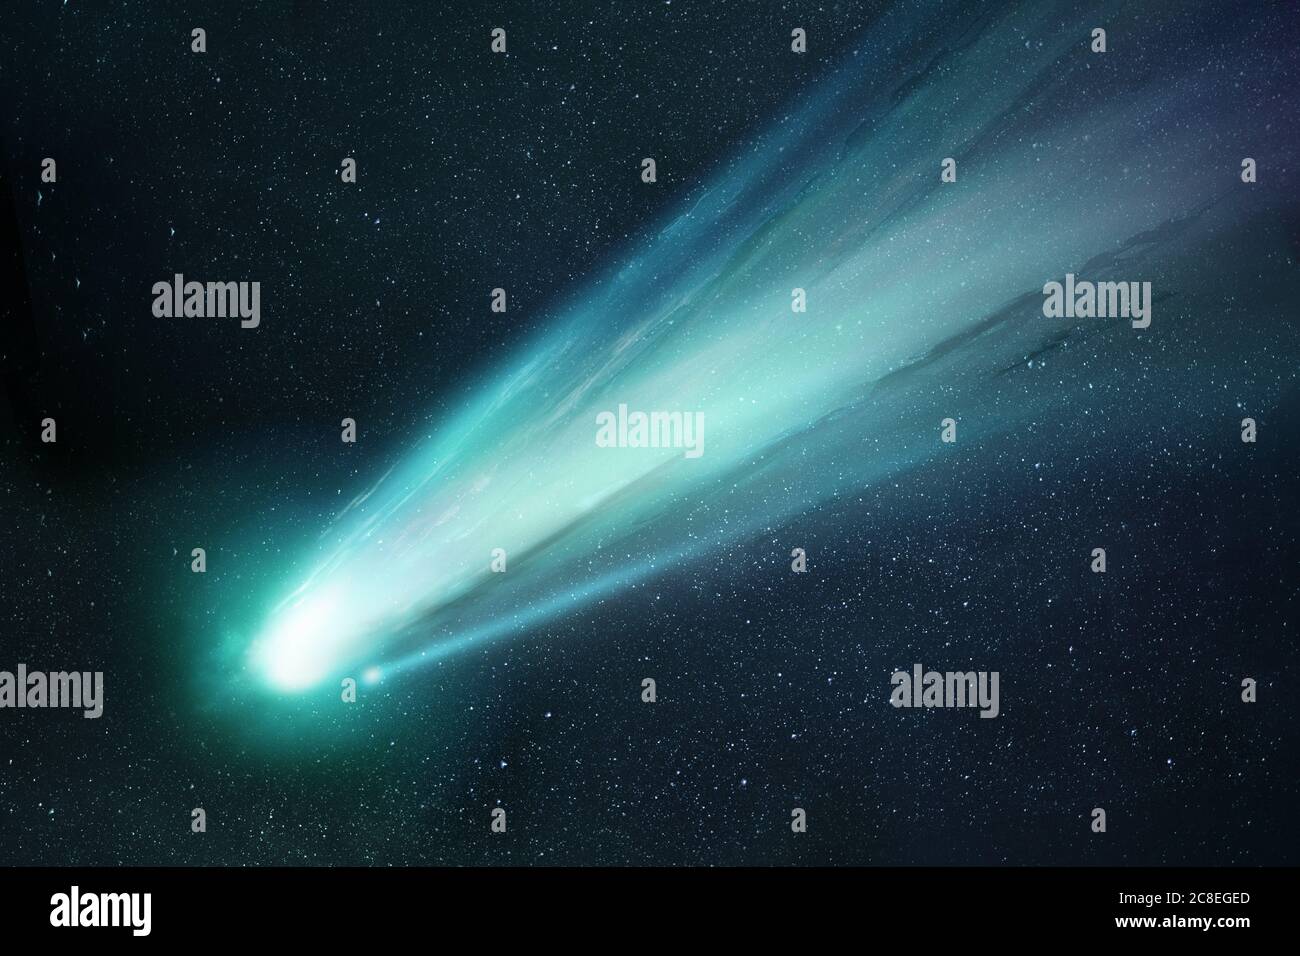 Comet Neowise passing the sun and releasing gases creating a tail and coma. Illustration. Stock Photo